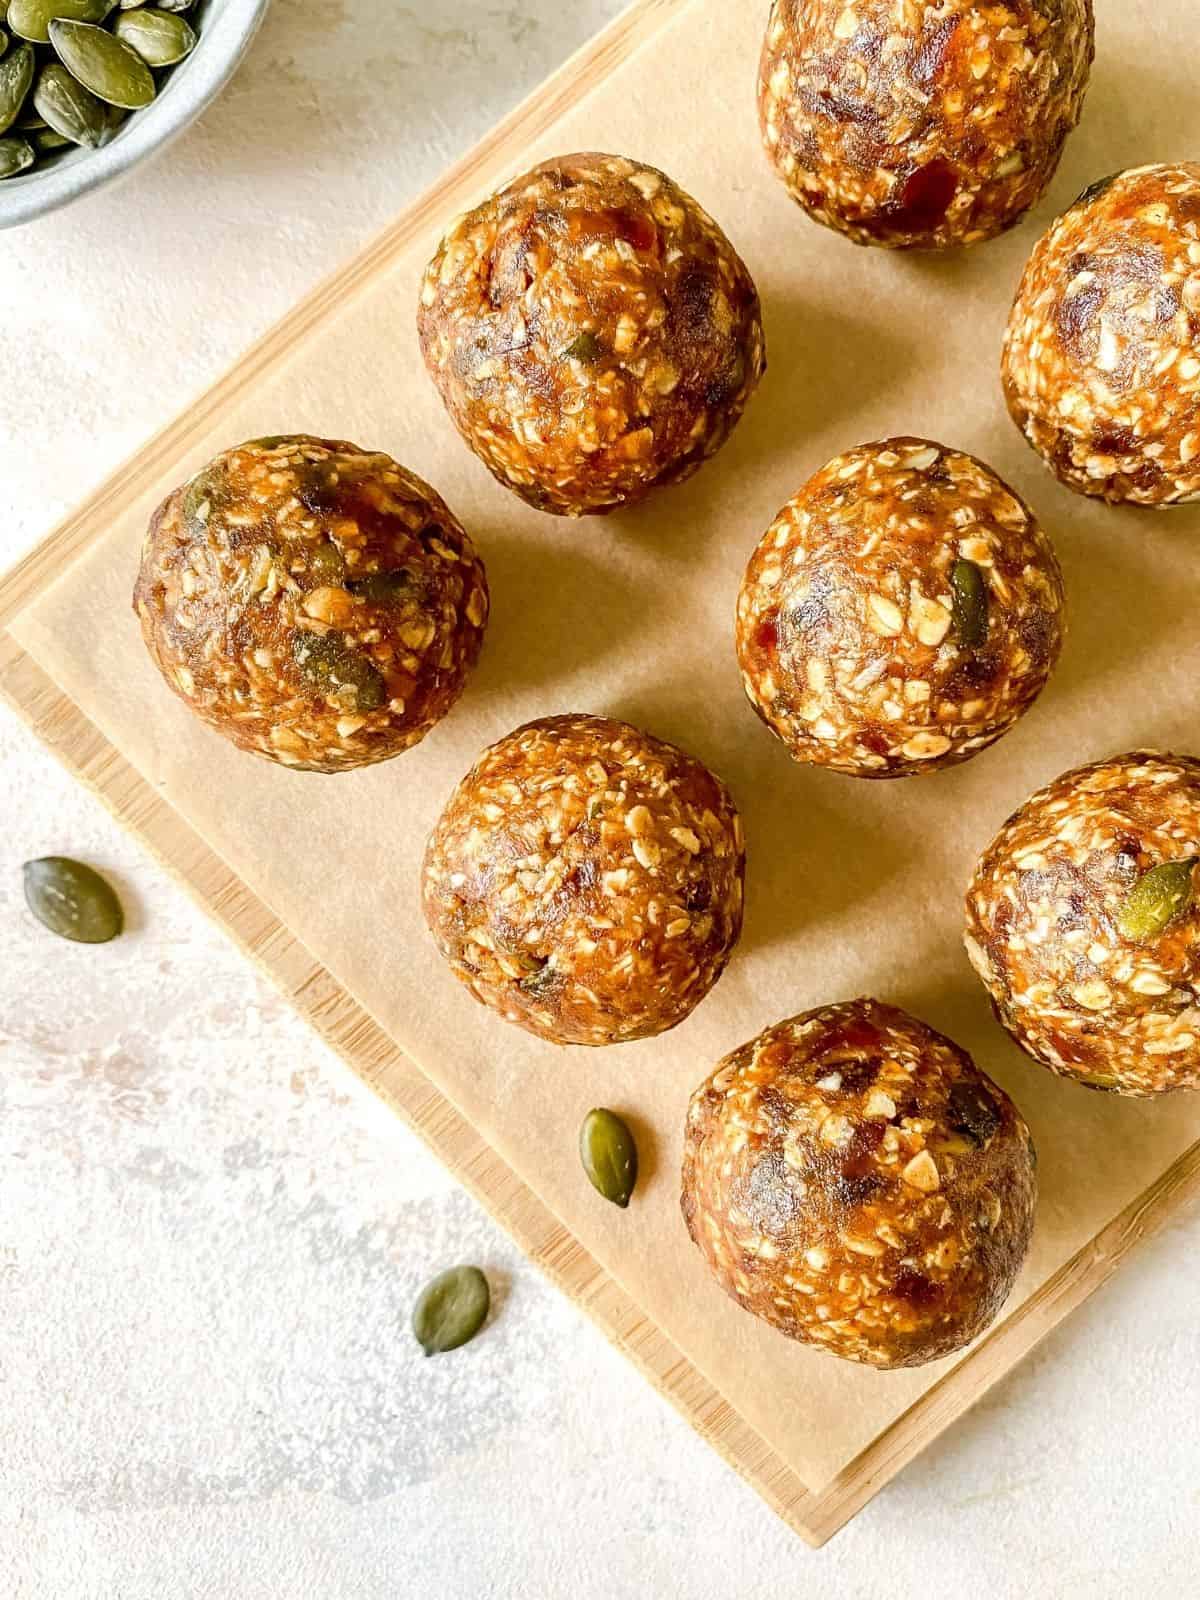 oatmeal bliss balls on a wooden board with a bowl of pumpkin seeds next to it.